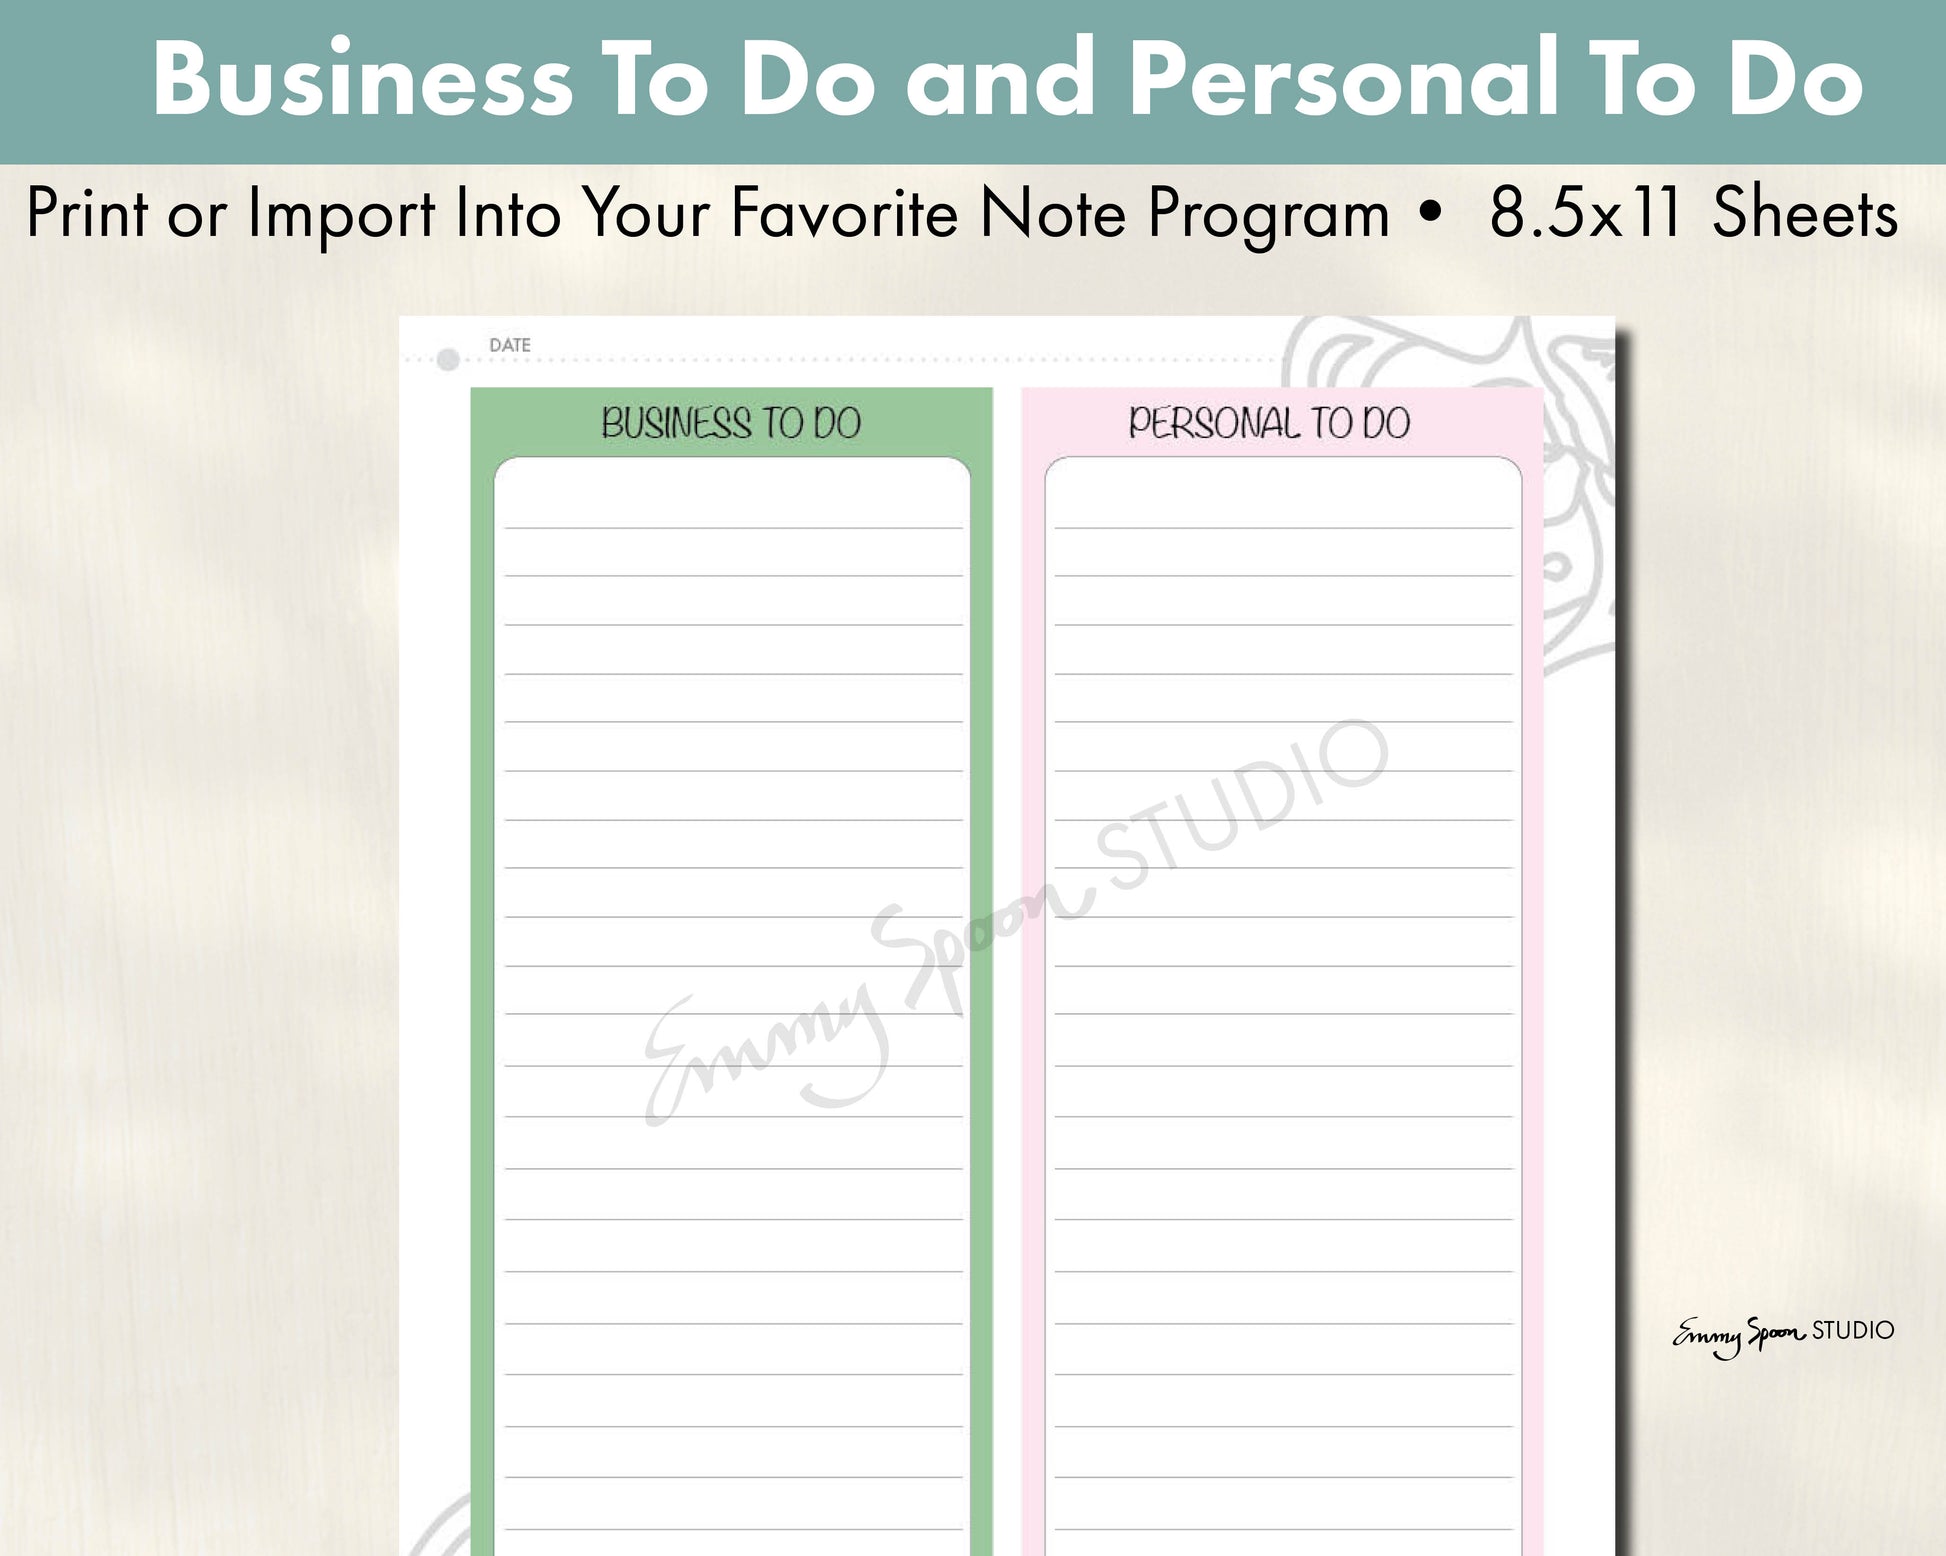 Business To Do and Personal To Do - Print or Import Into Your Favorite Note Program - 8.5x11 Sheets by Emmy Spoon Studio